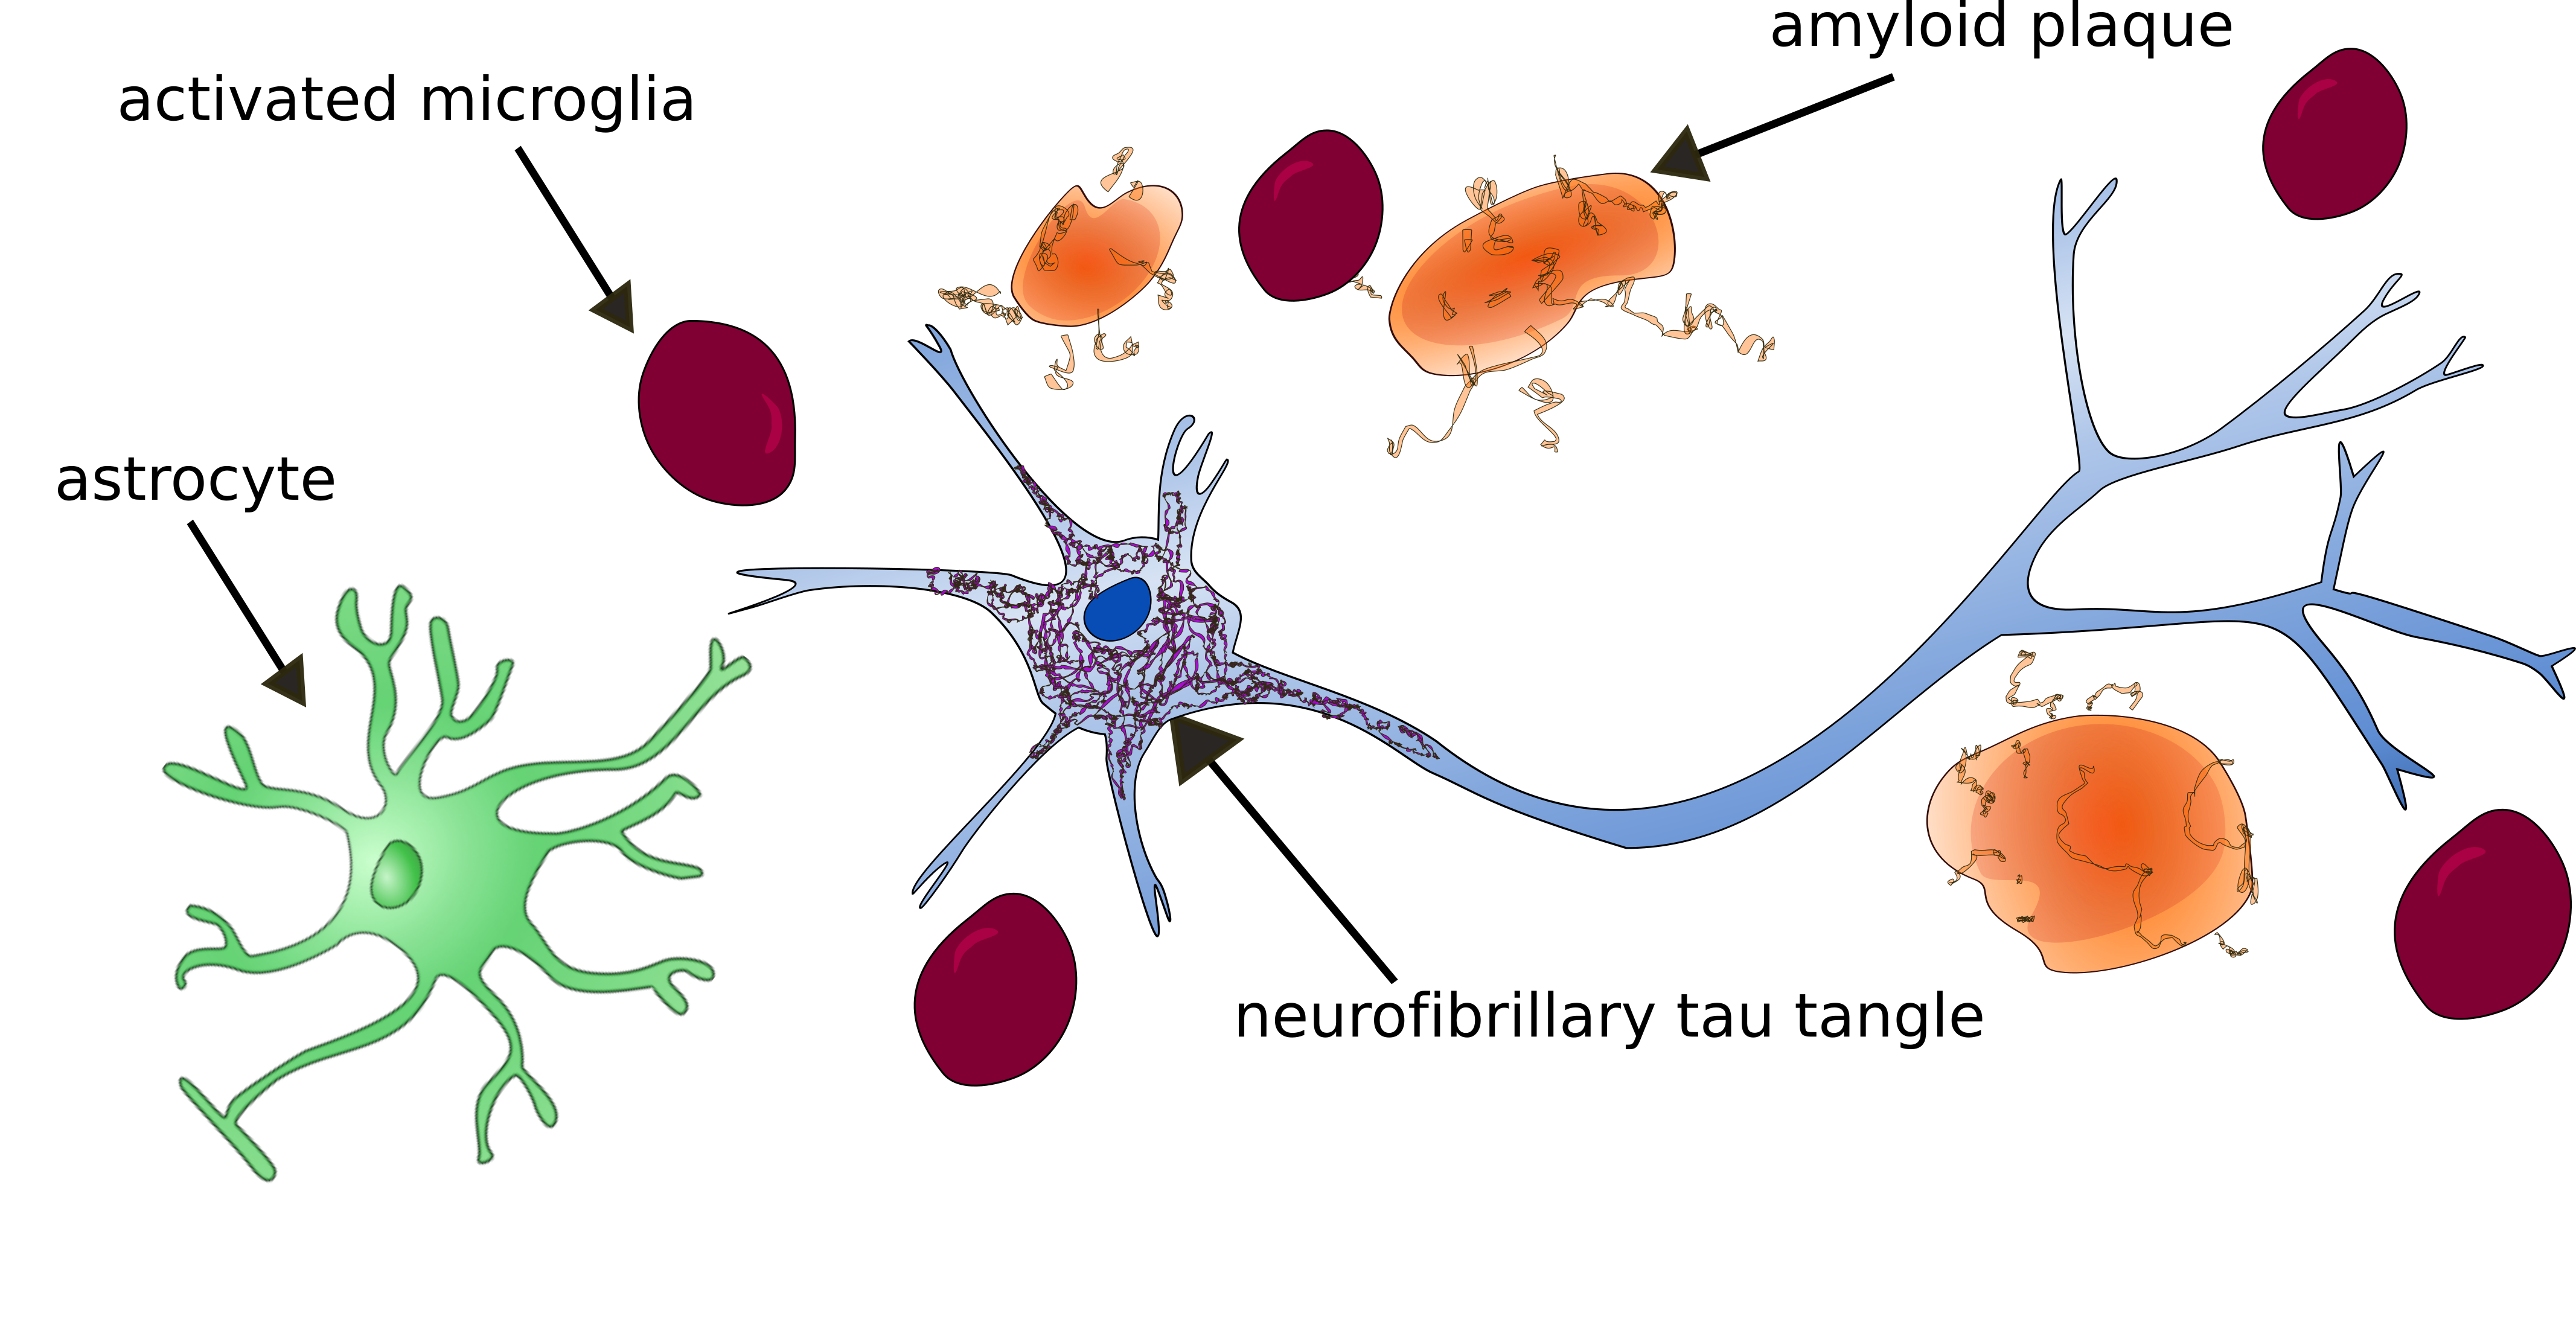 A basic cartoon schematic to show the pathology of Alzheimer's disease. Specifically, the inflammatory glial response includes activated microglia and astrocytes. The neurofibrillary tau tangles are interneuronal, and the amyloid plaques, surrounded by diffuse halos of amyloid-Beta, are extracellular.